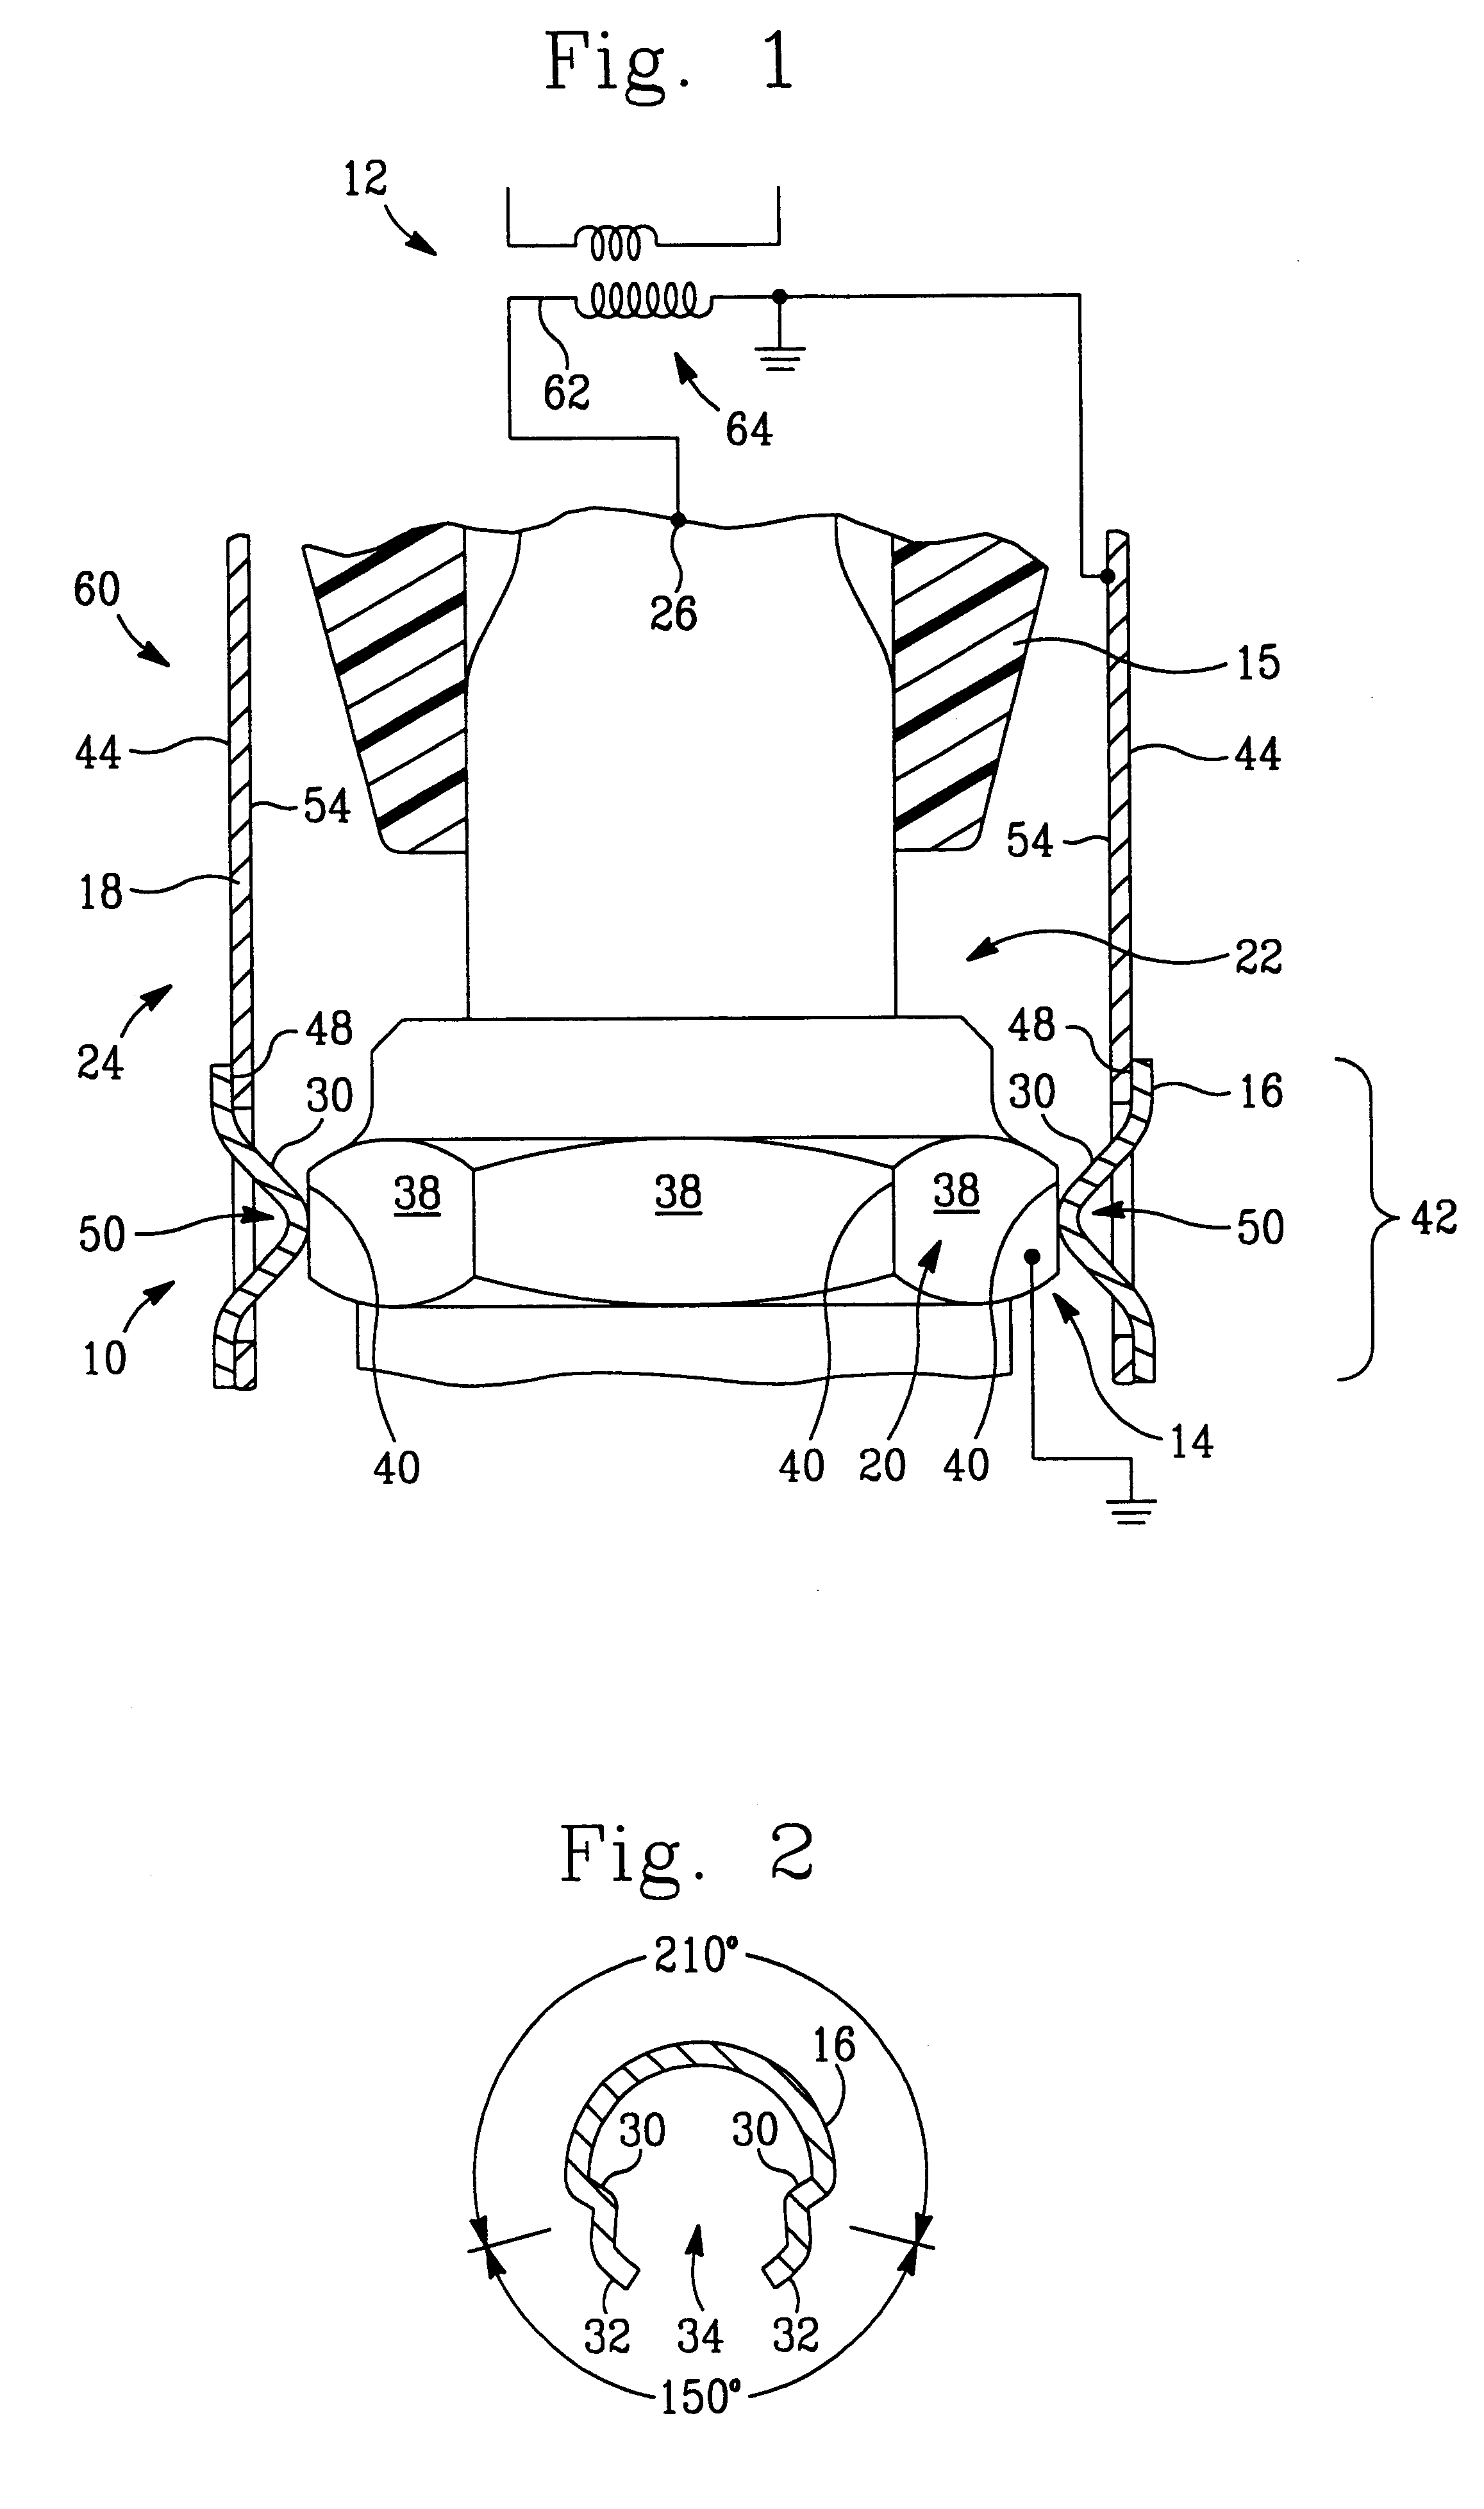 Shield and spring interface to a spark plug from a pencil coil